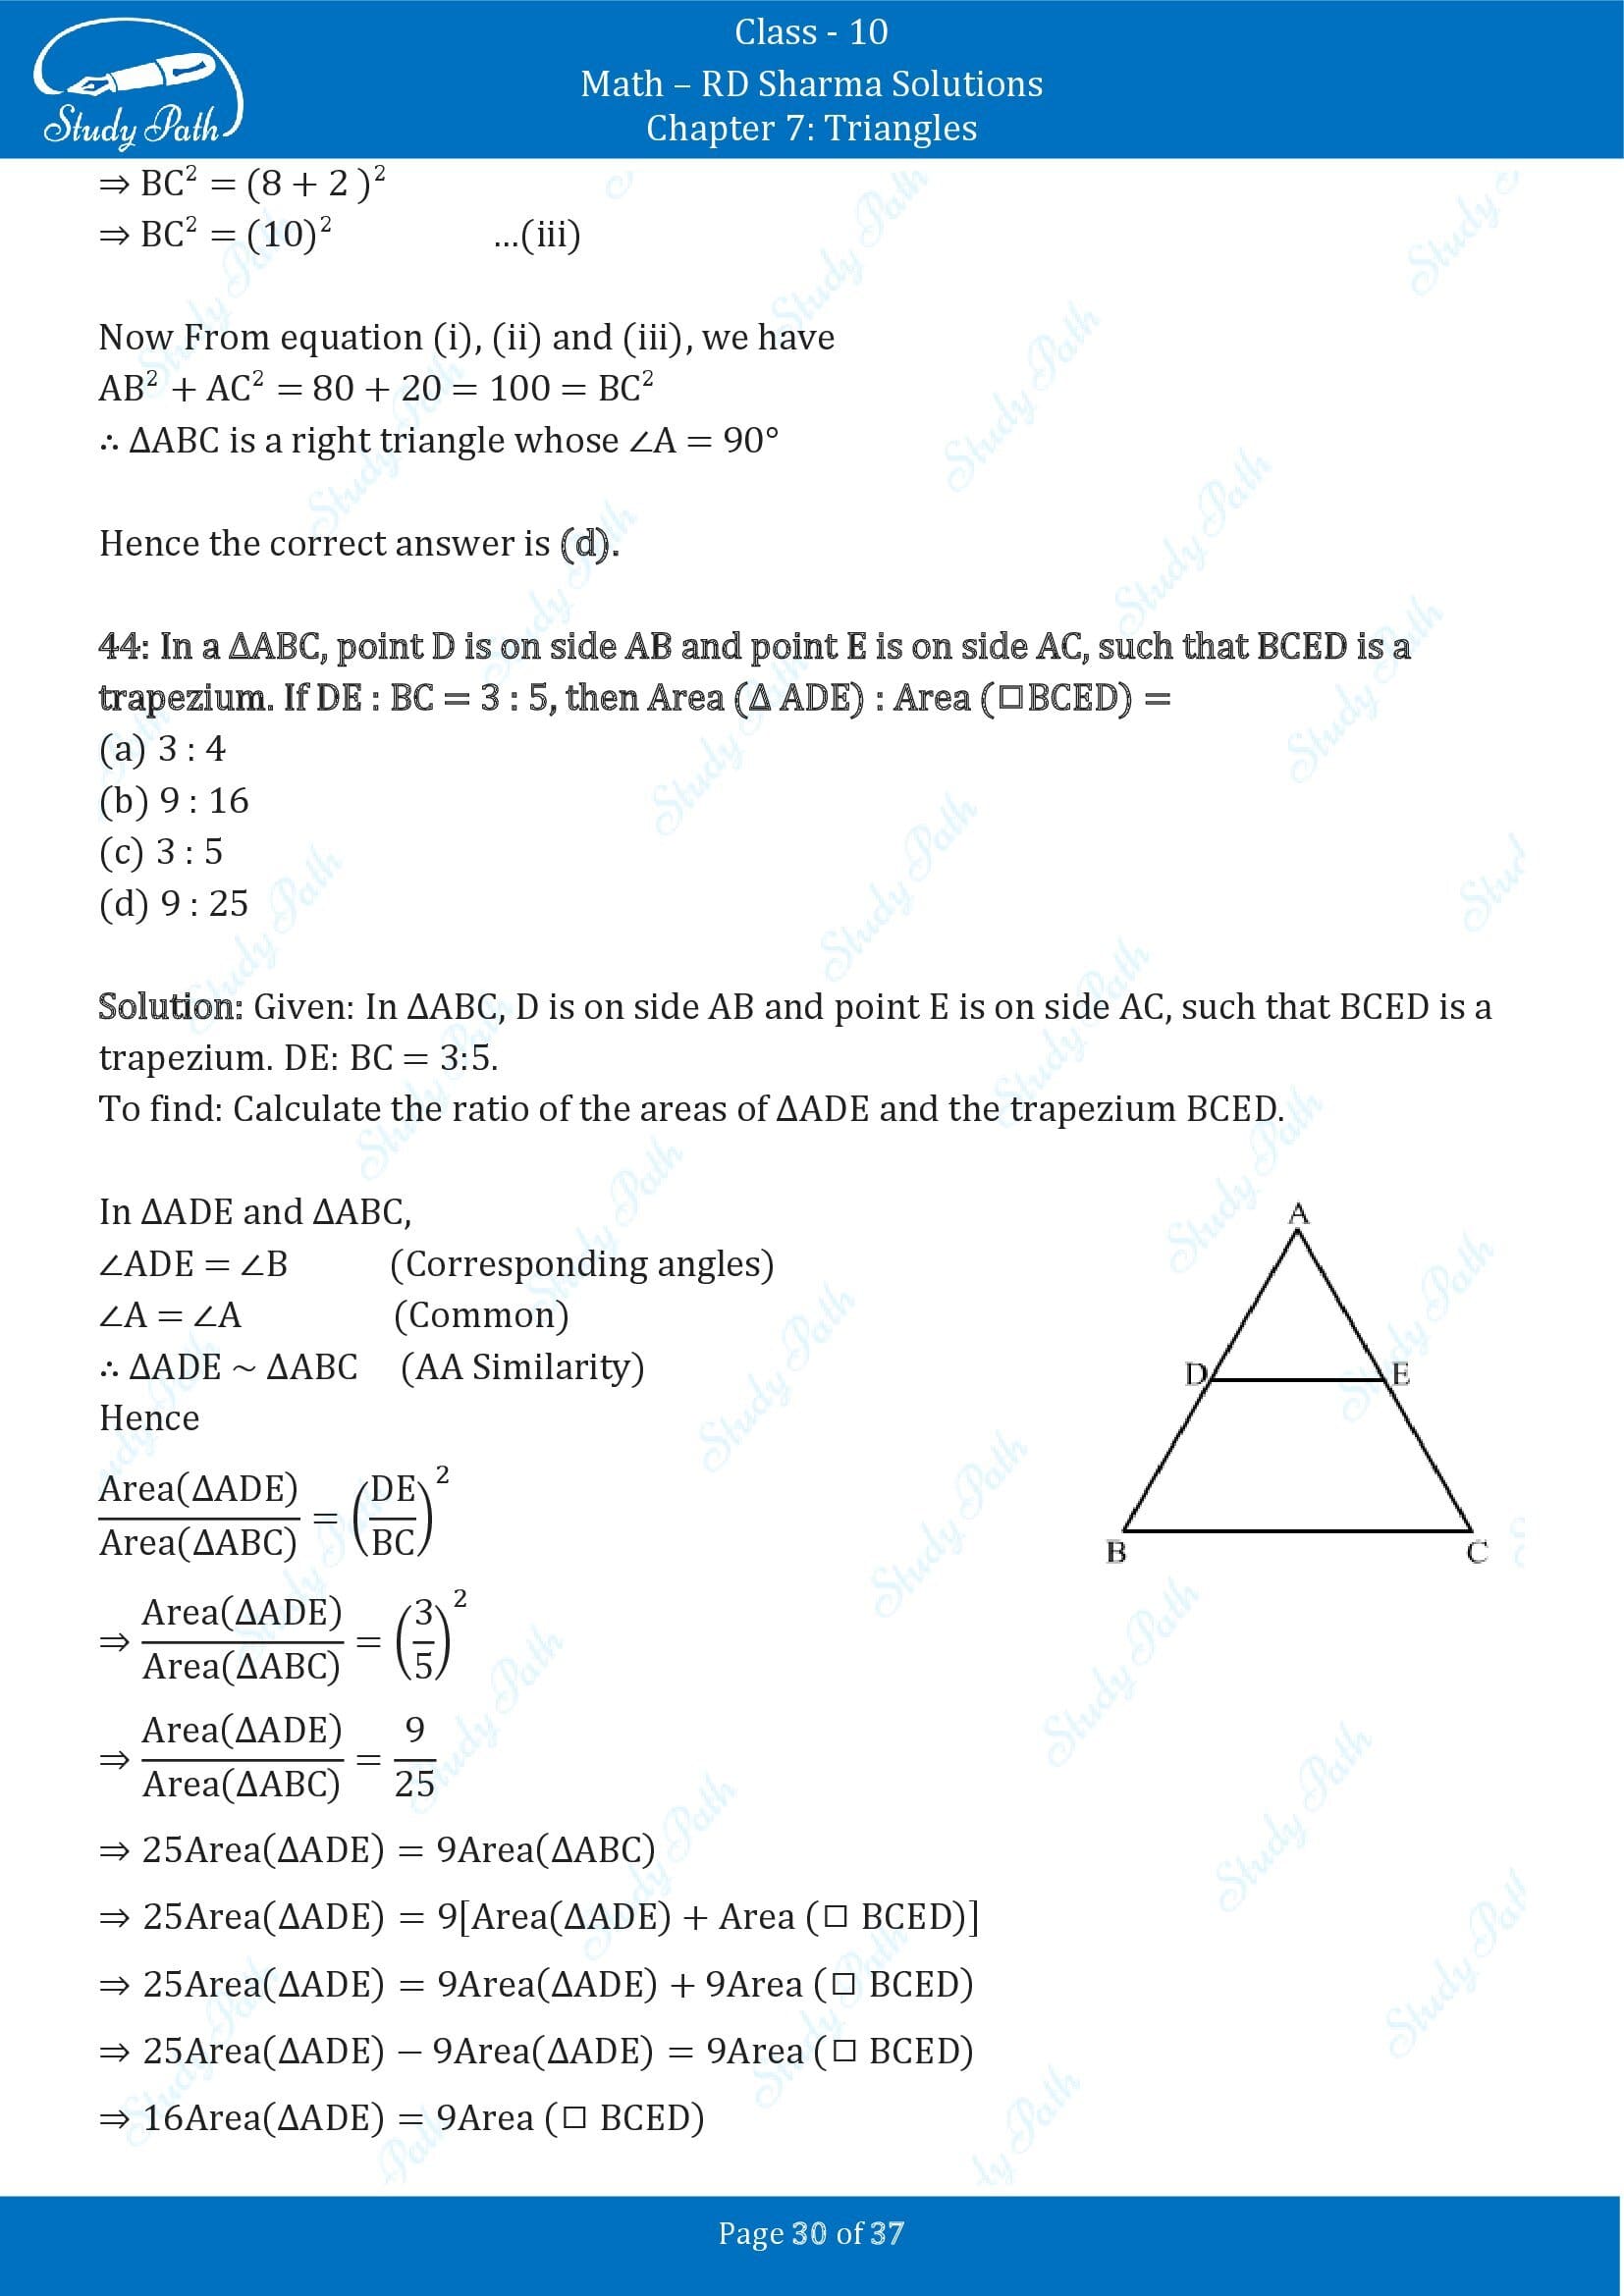 RD Sharma Solutions Class 10 Chapter 7 Triangles Multiple Choice Question MCQs 00030